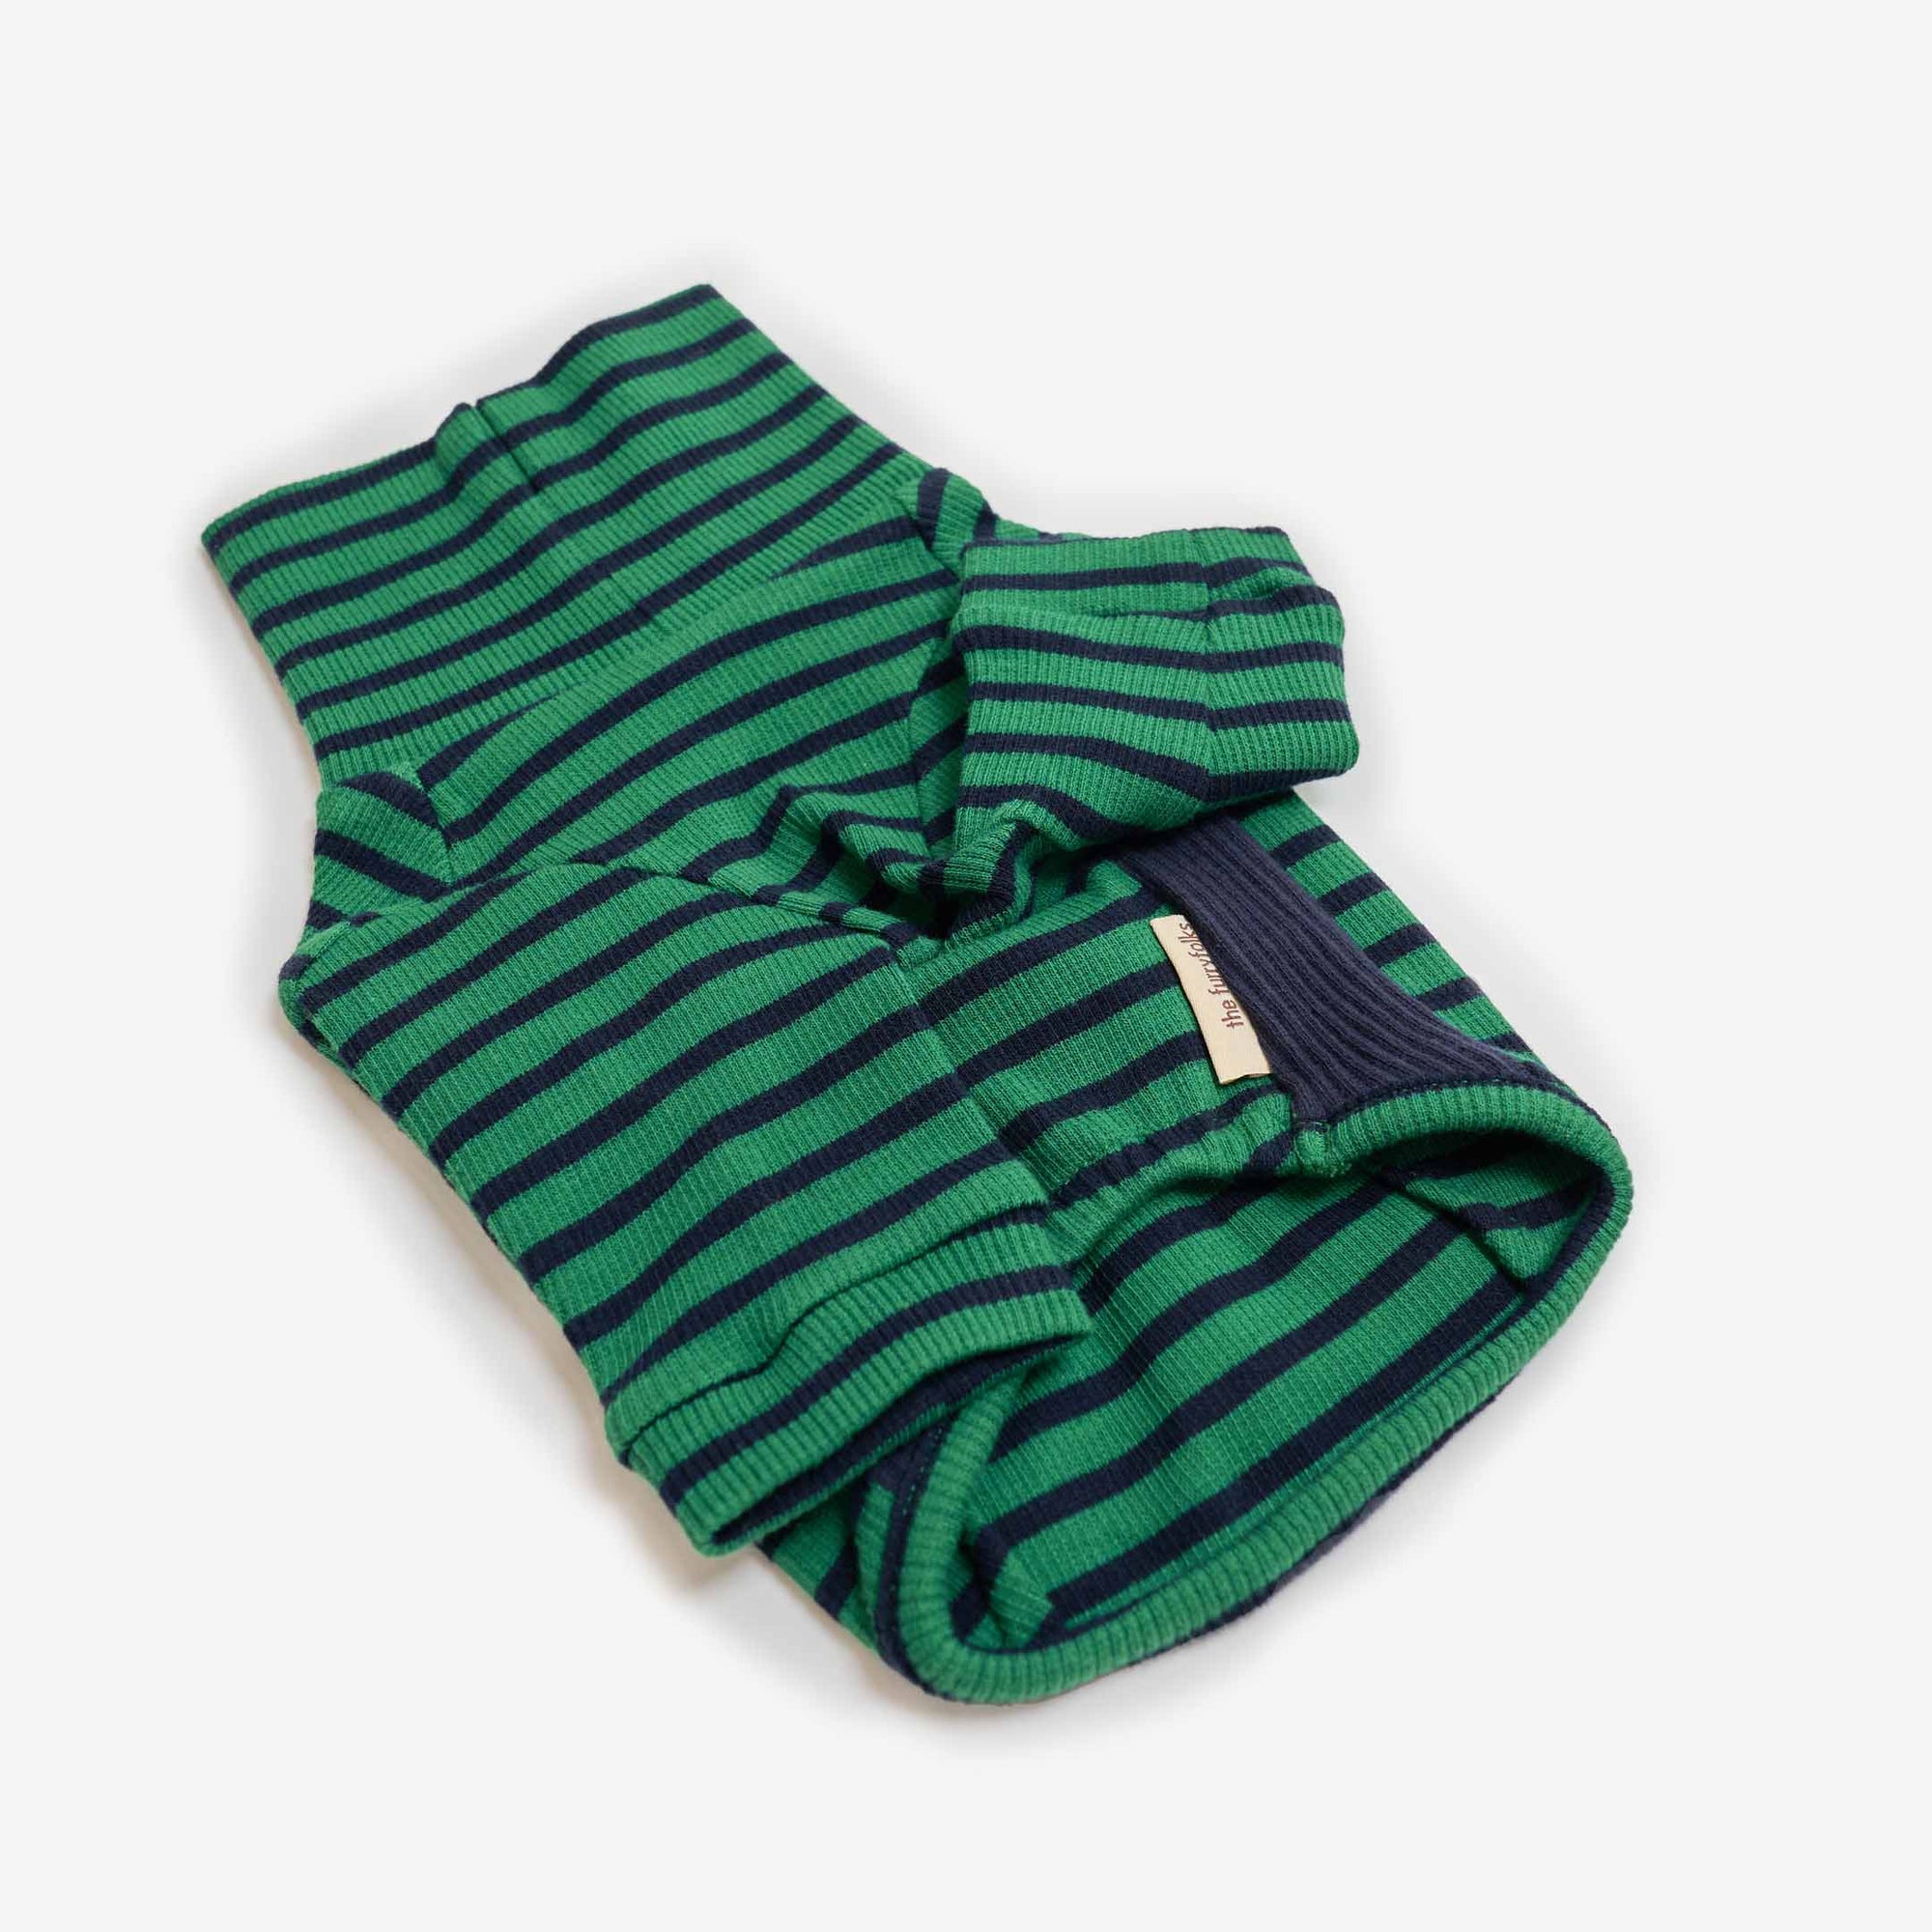 Chic green and navy striped turtleneck shirt for dogs, featuring a comfortable stretch fabric and a classy label.